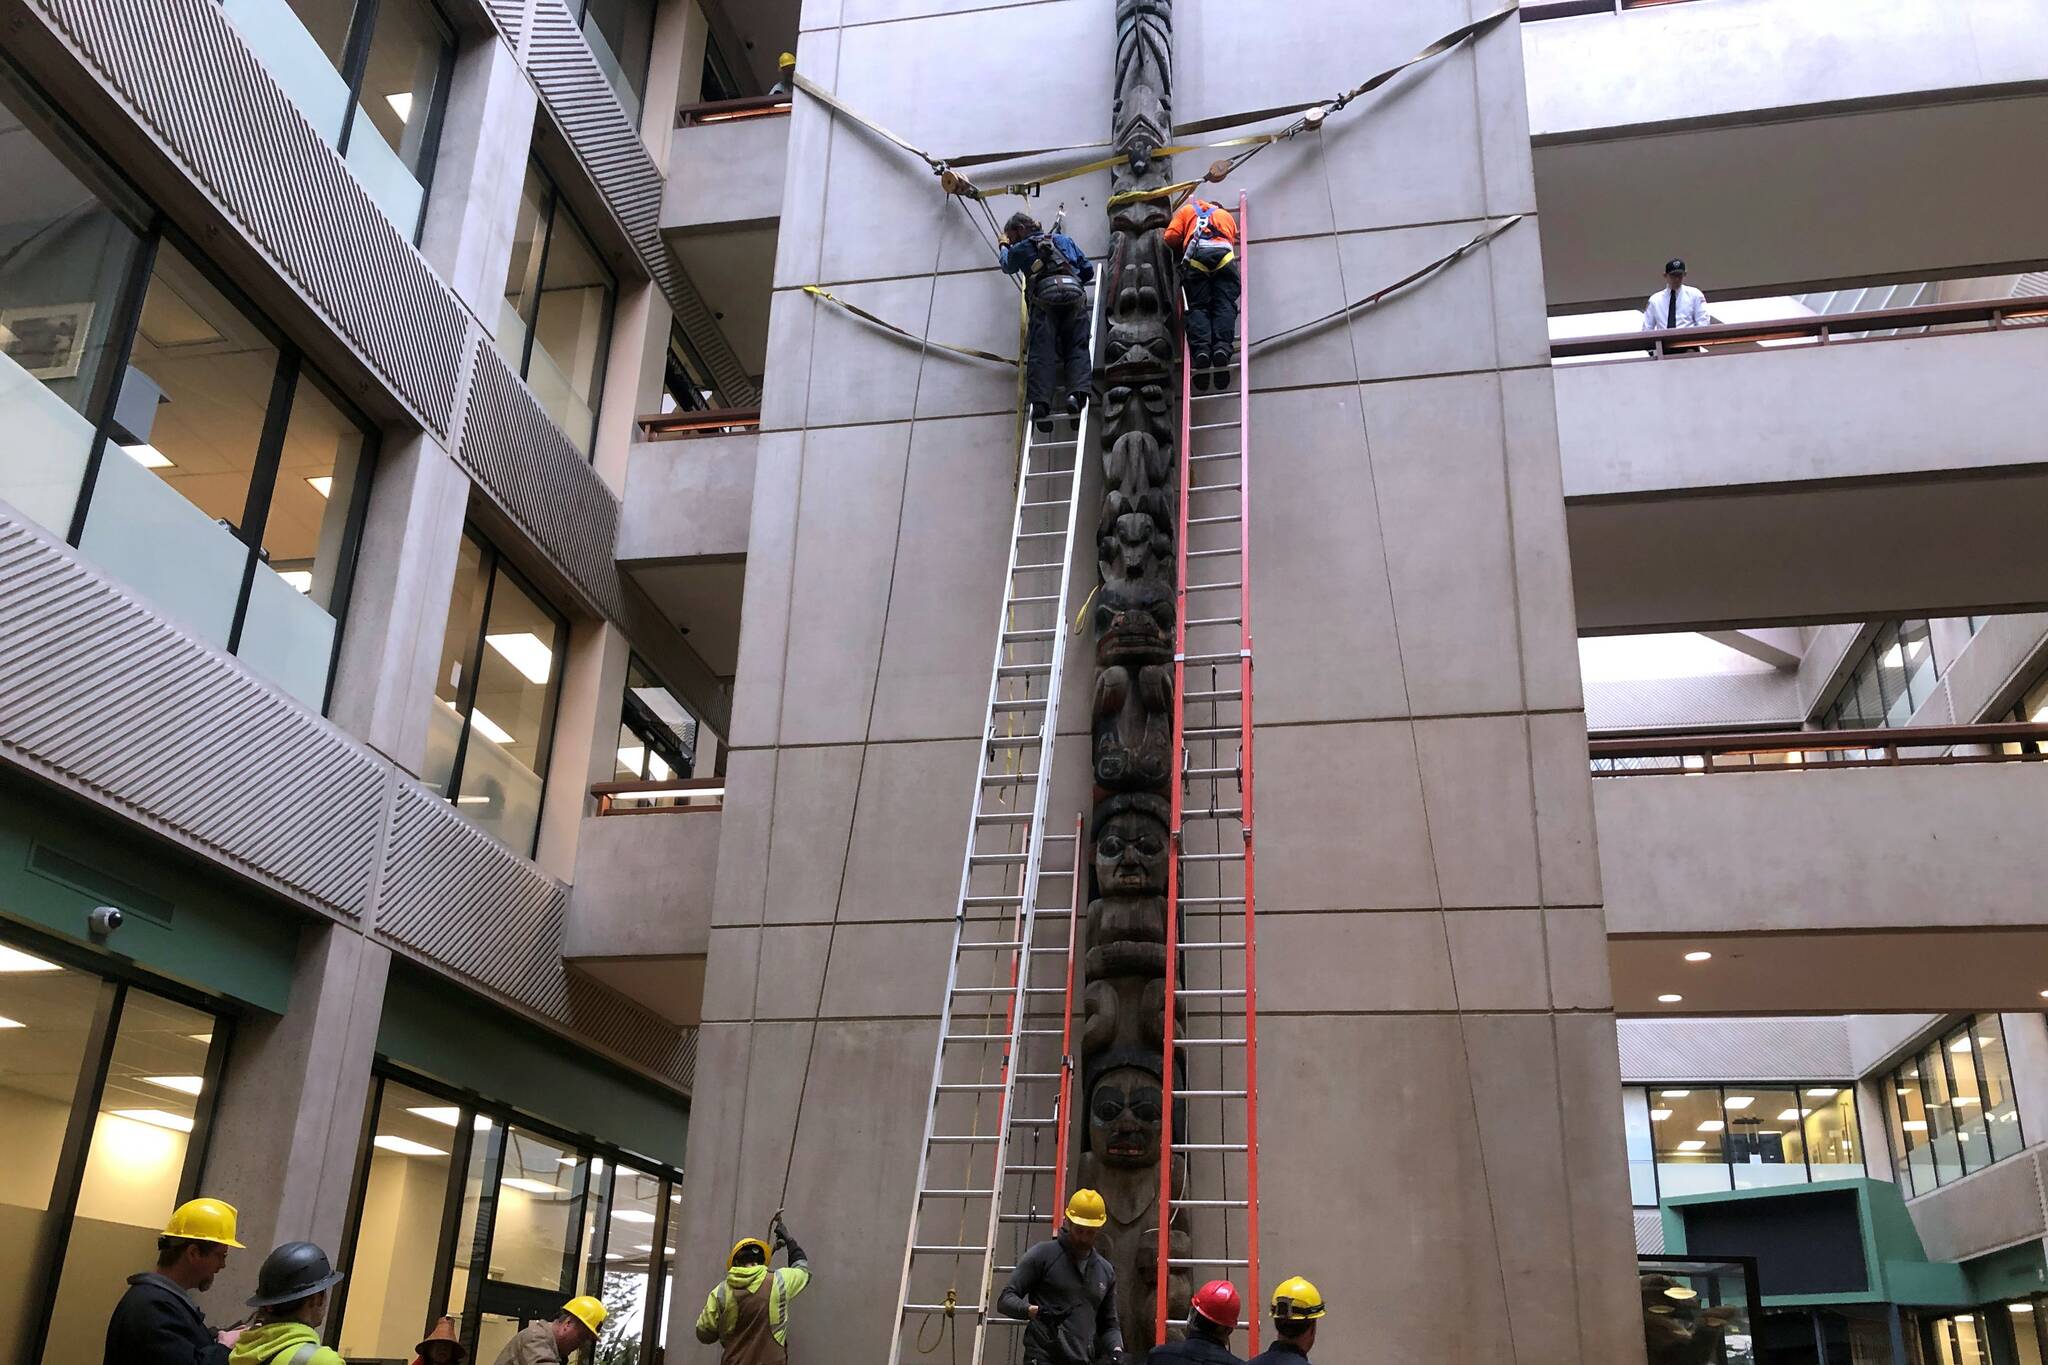 The Wooshkeetaan Kootéeyaa totem pole was re-installed at its new home in the attrium of the State Office Building on Friday, March 11, 2022. Workers from Alaska Electric Light and Power helped install the pole. (Peter Segall / Juneau Empire)